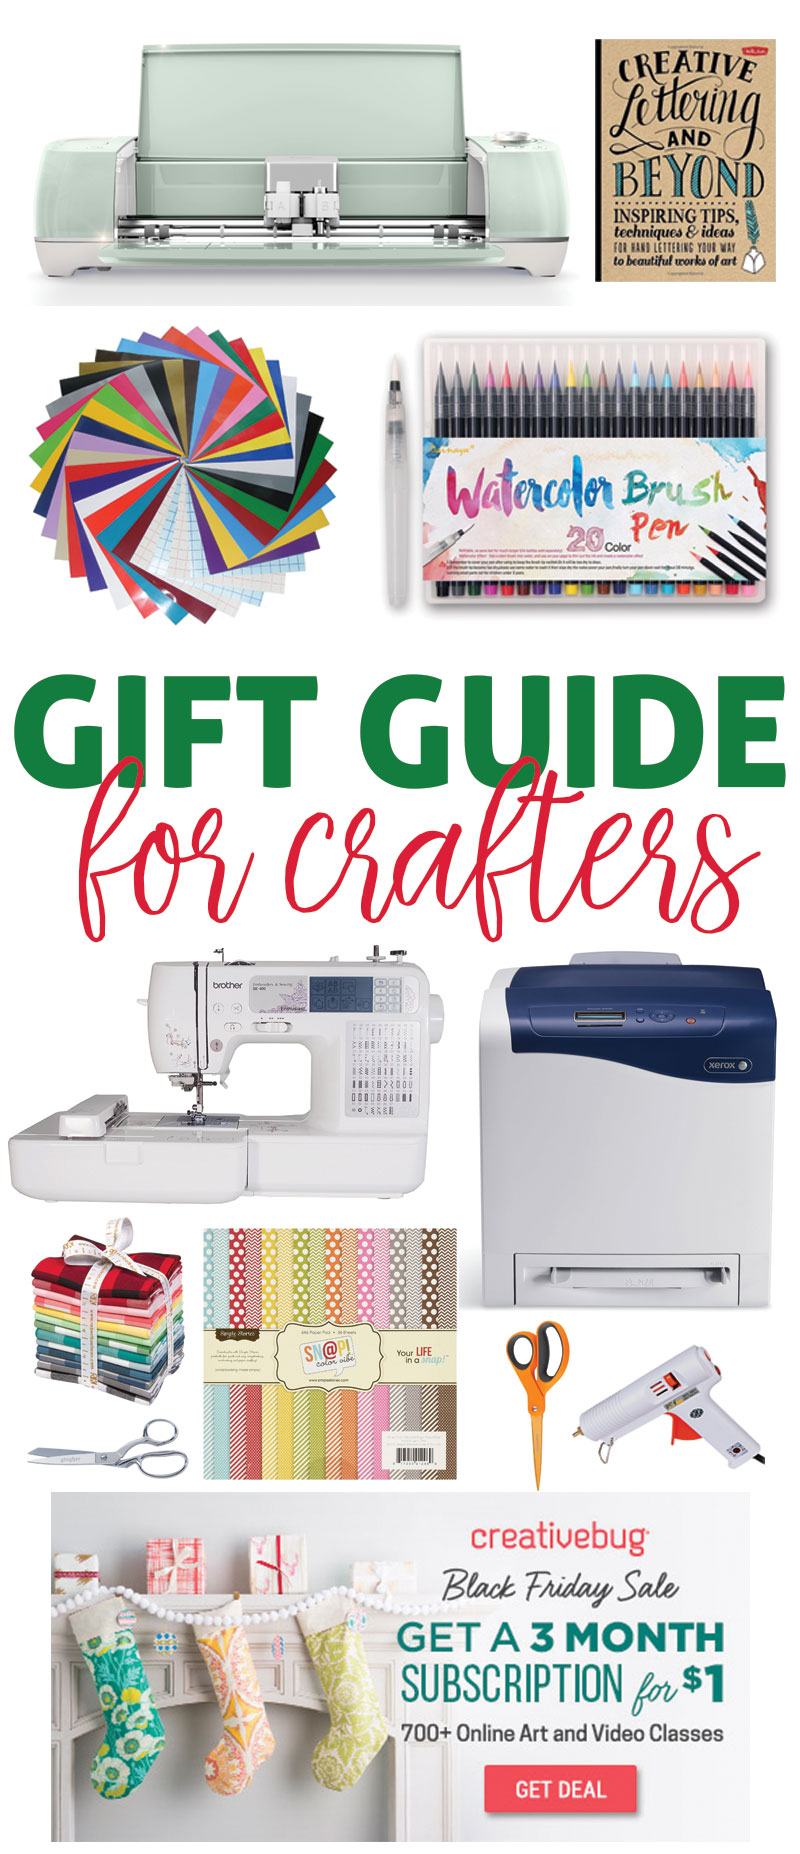 The 12 Best Gifts for Crafters by Lindi Haws of Love The Day